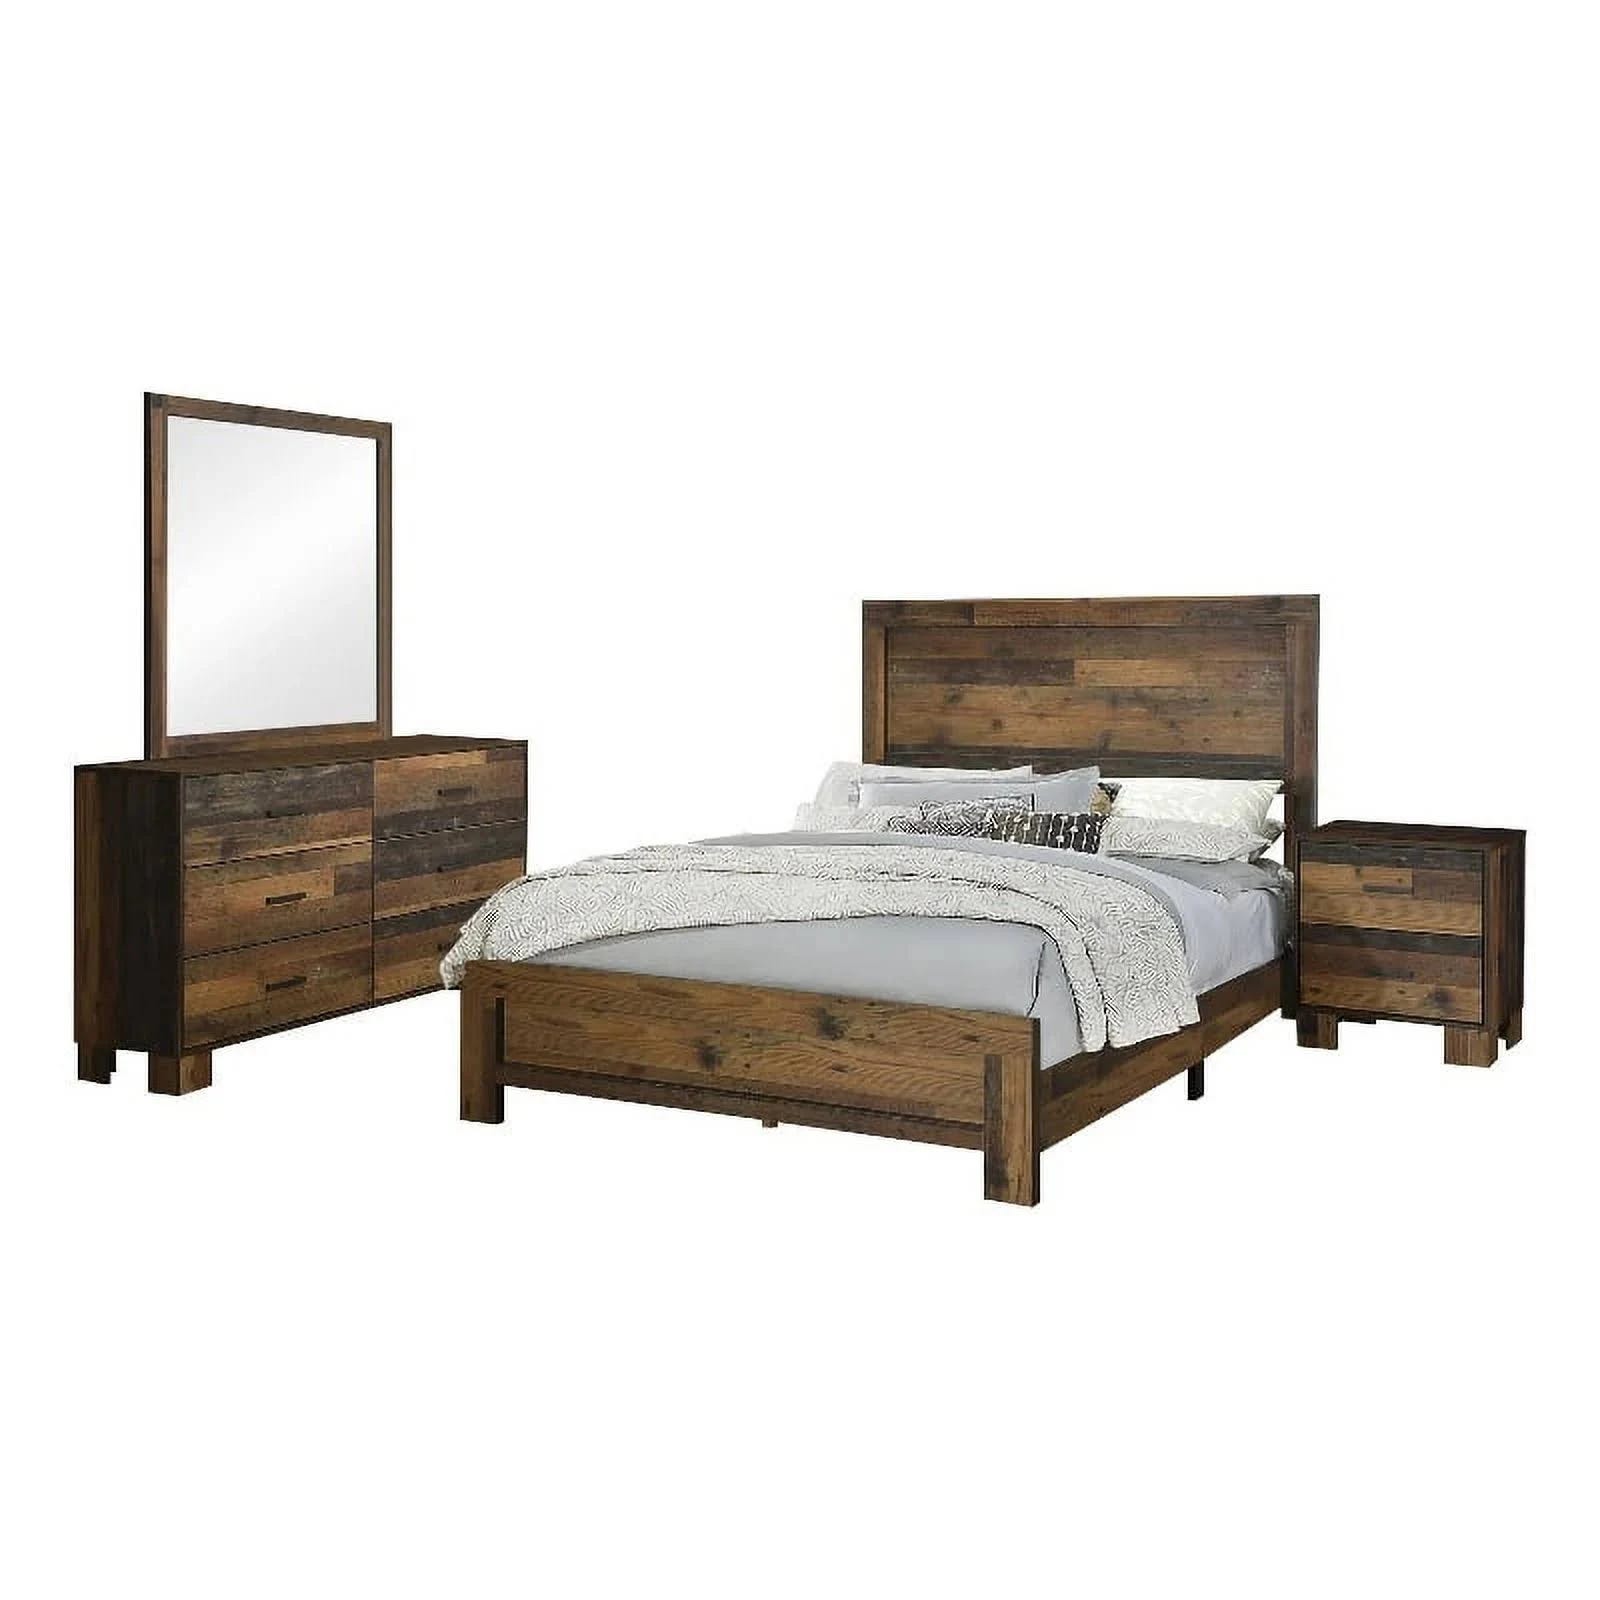 Pemberly Row Farmhouse Bedroom Set - Brown Wood Panel Queen Bed | Image